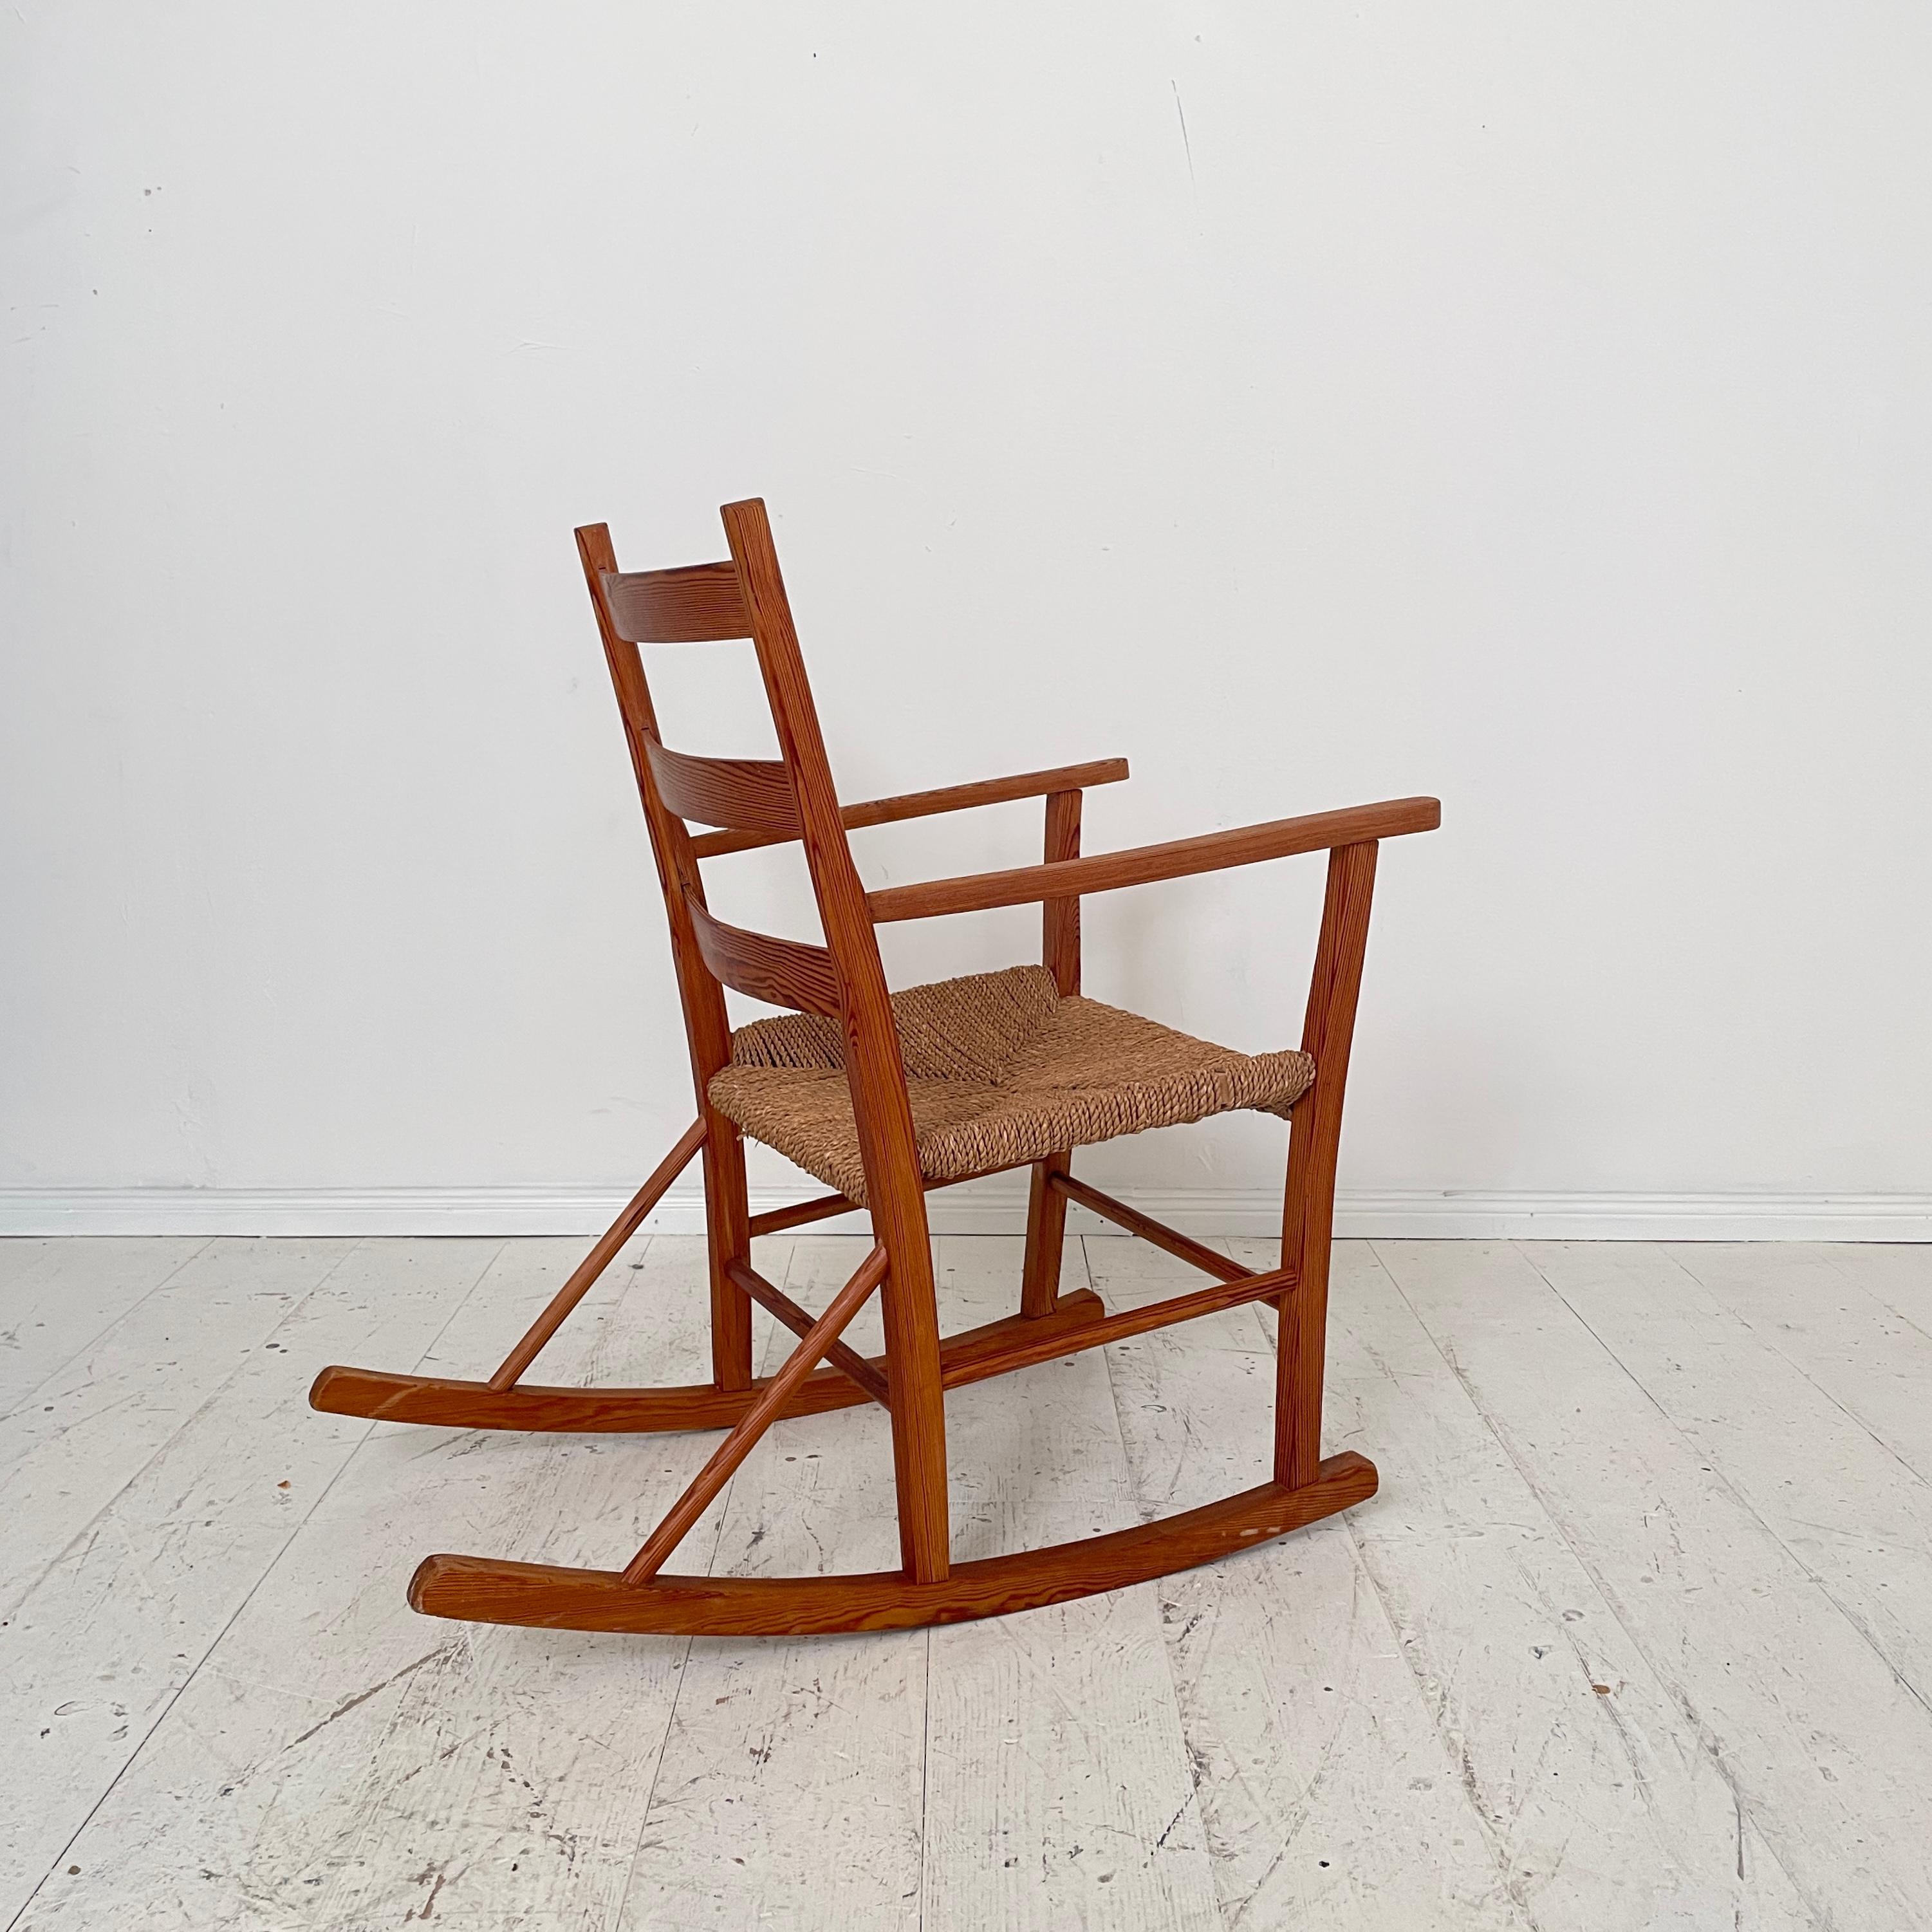 Norwegian Rocking Chair by Aksel Hansson in Pine, 1930 For Sale 4